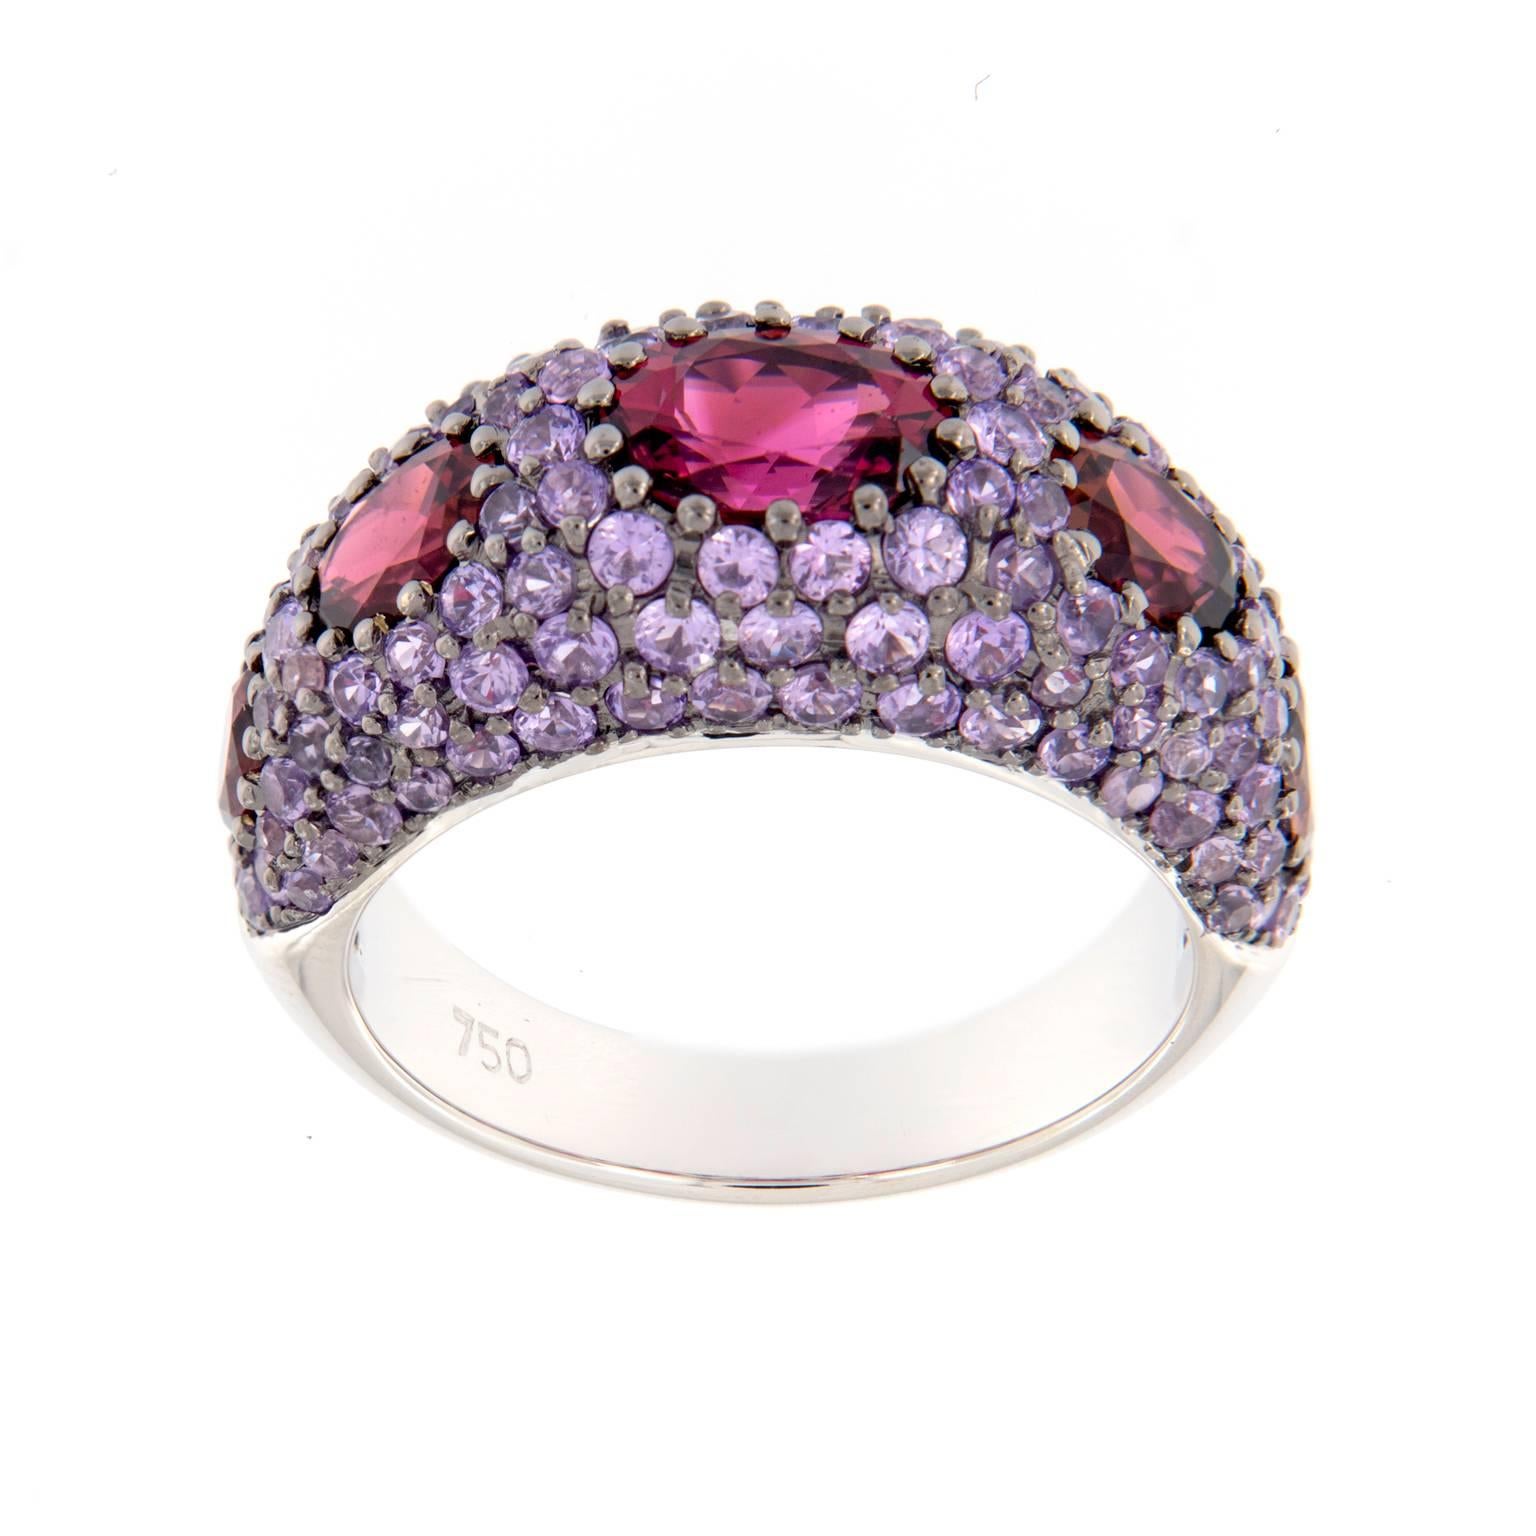 Beautiful combination of violet sapphires and pink tourmalines create a unique look. Dome ring is crafted in 18k white gold. Ring size 6.75. Weighs 9 grams

Sapphire 2.81 cttw
Tourmaline 2.27 cttw